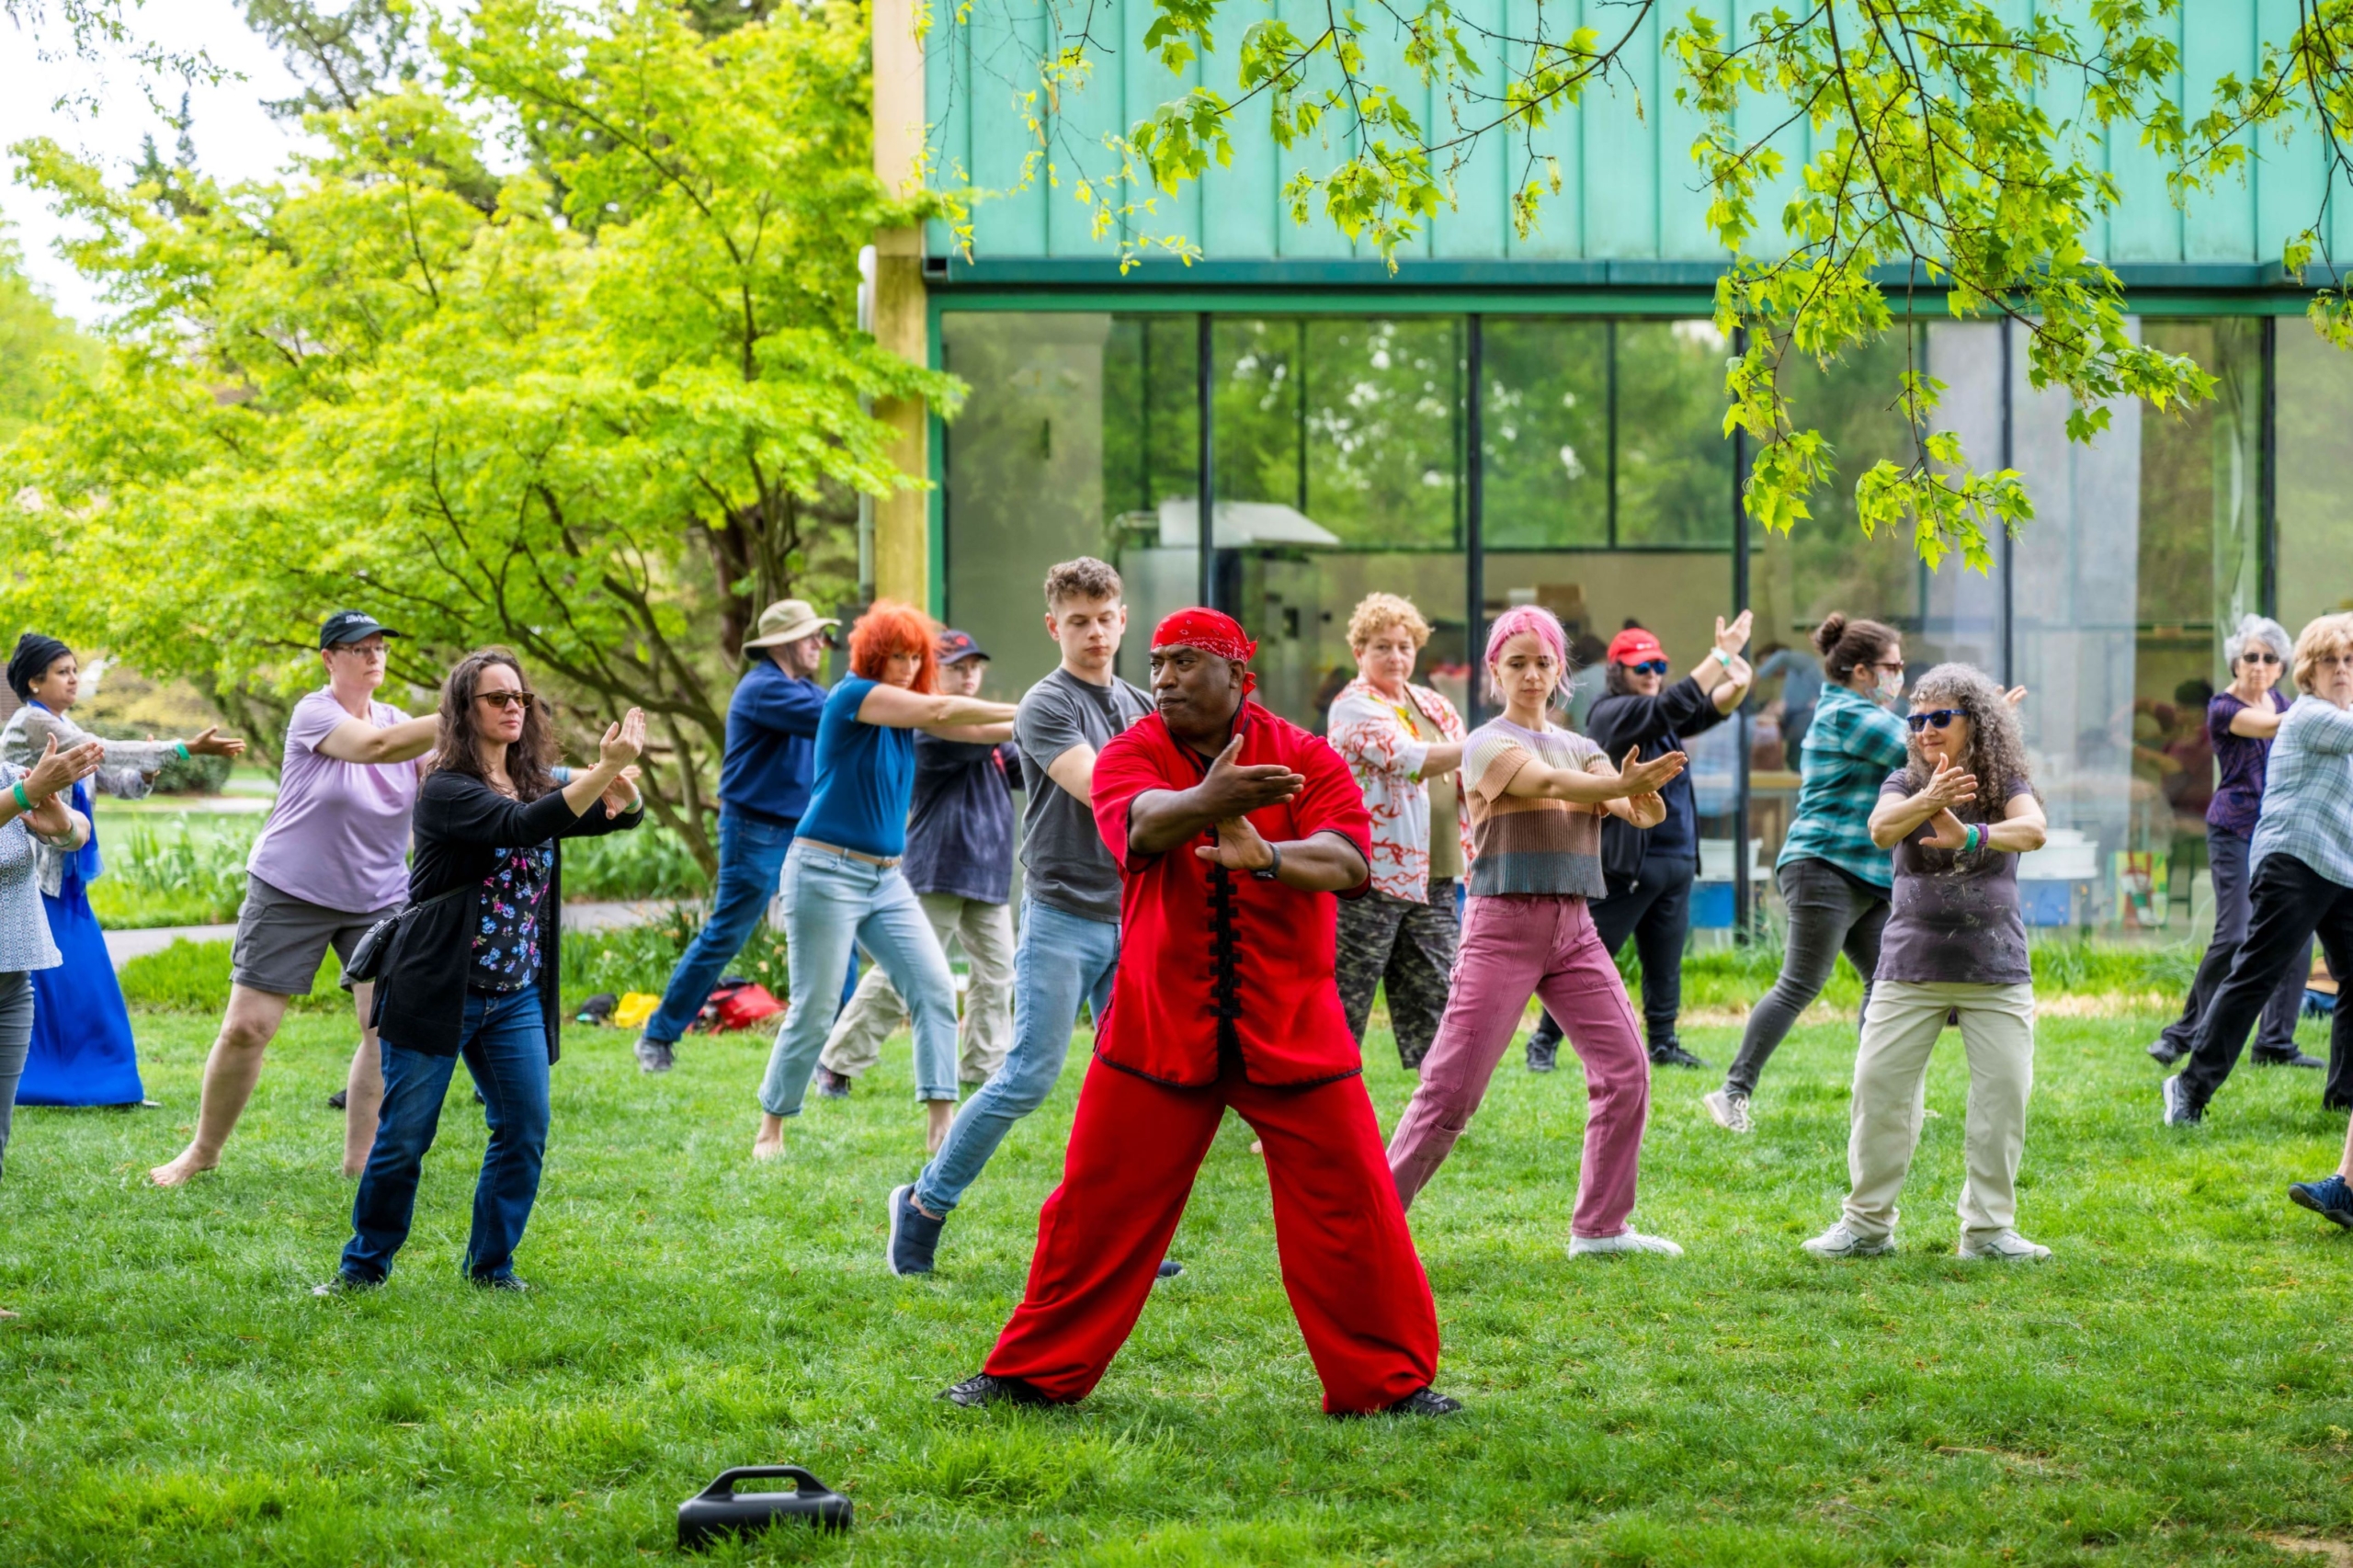 A man dressed in red leads a class of teenagers and adults in a Tai Chi exercise outdoors.